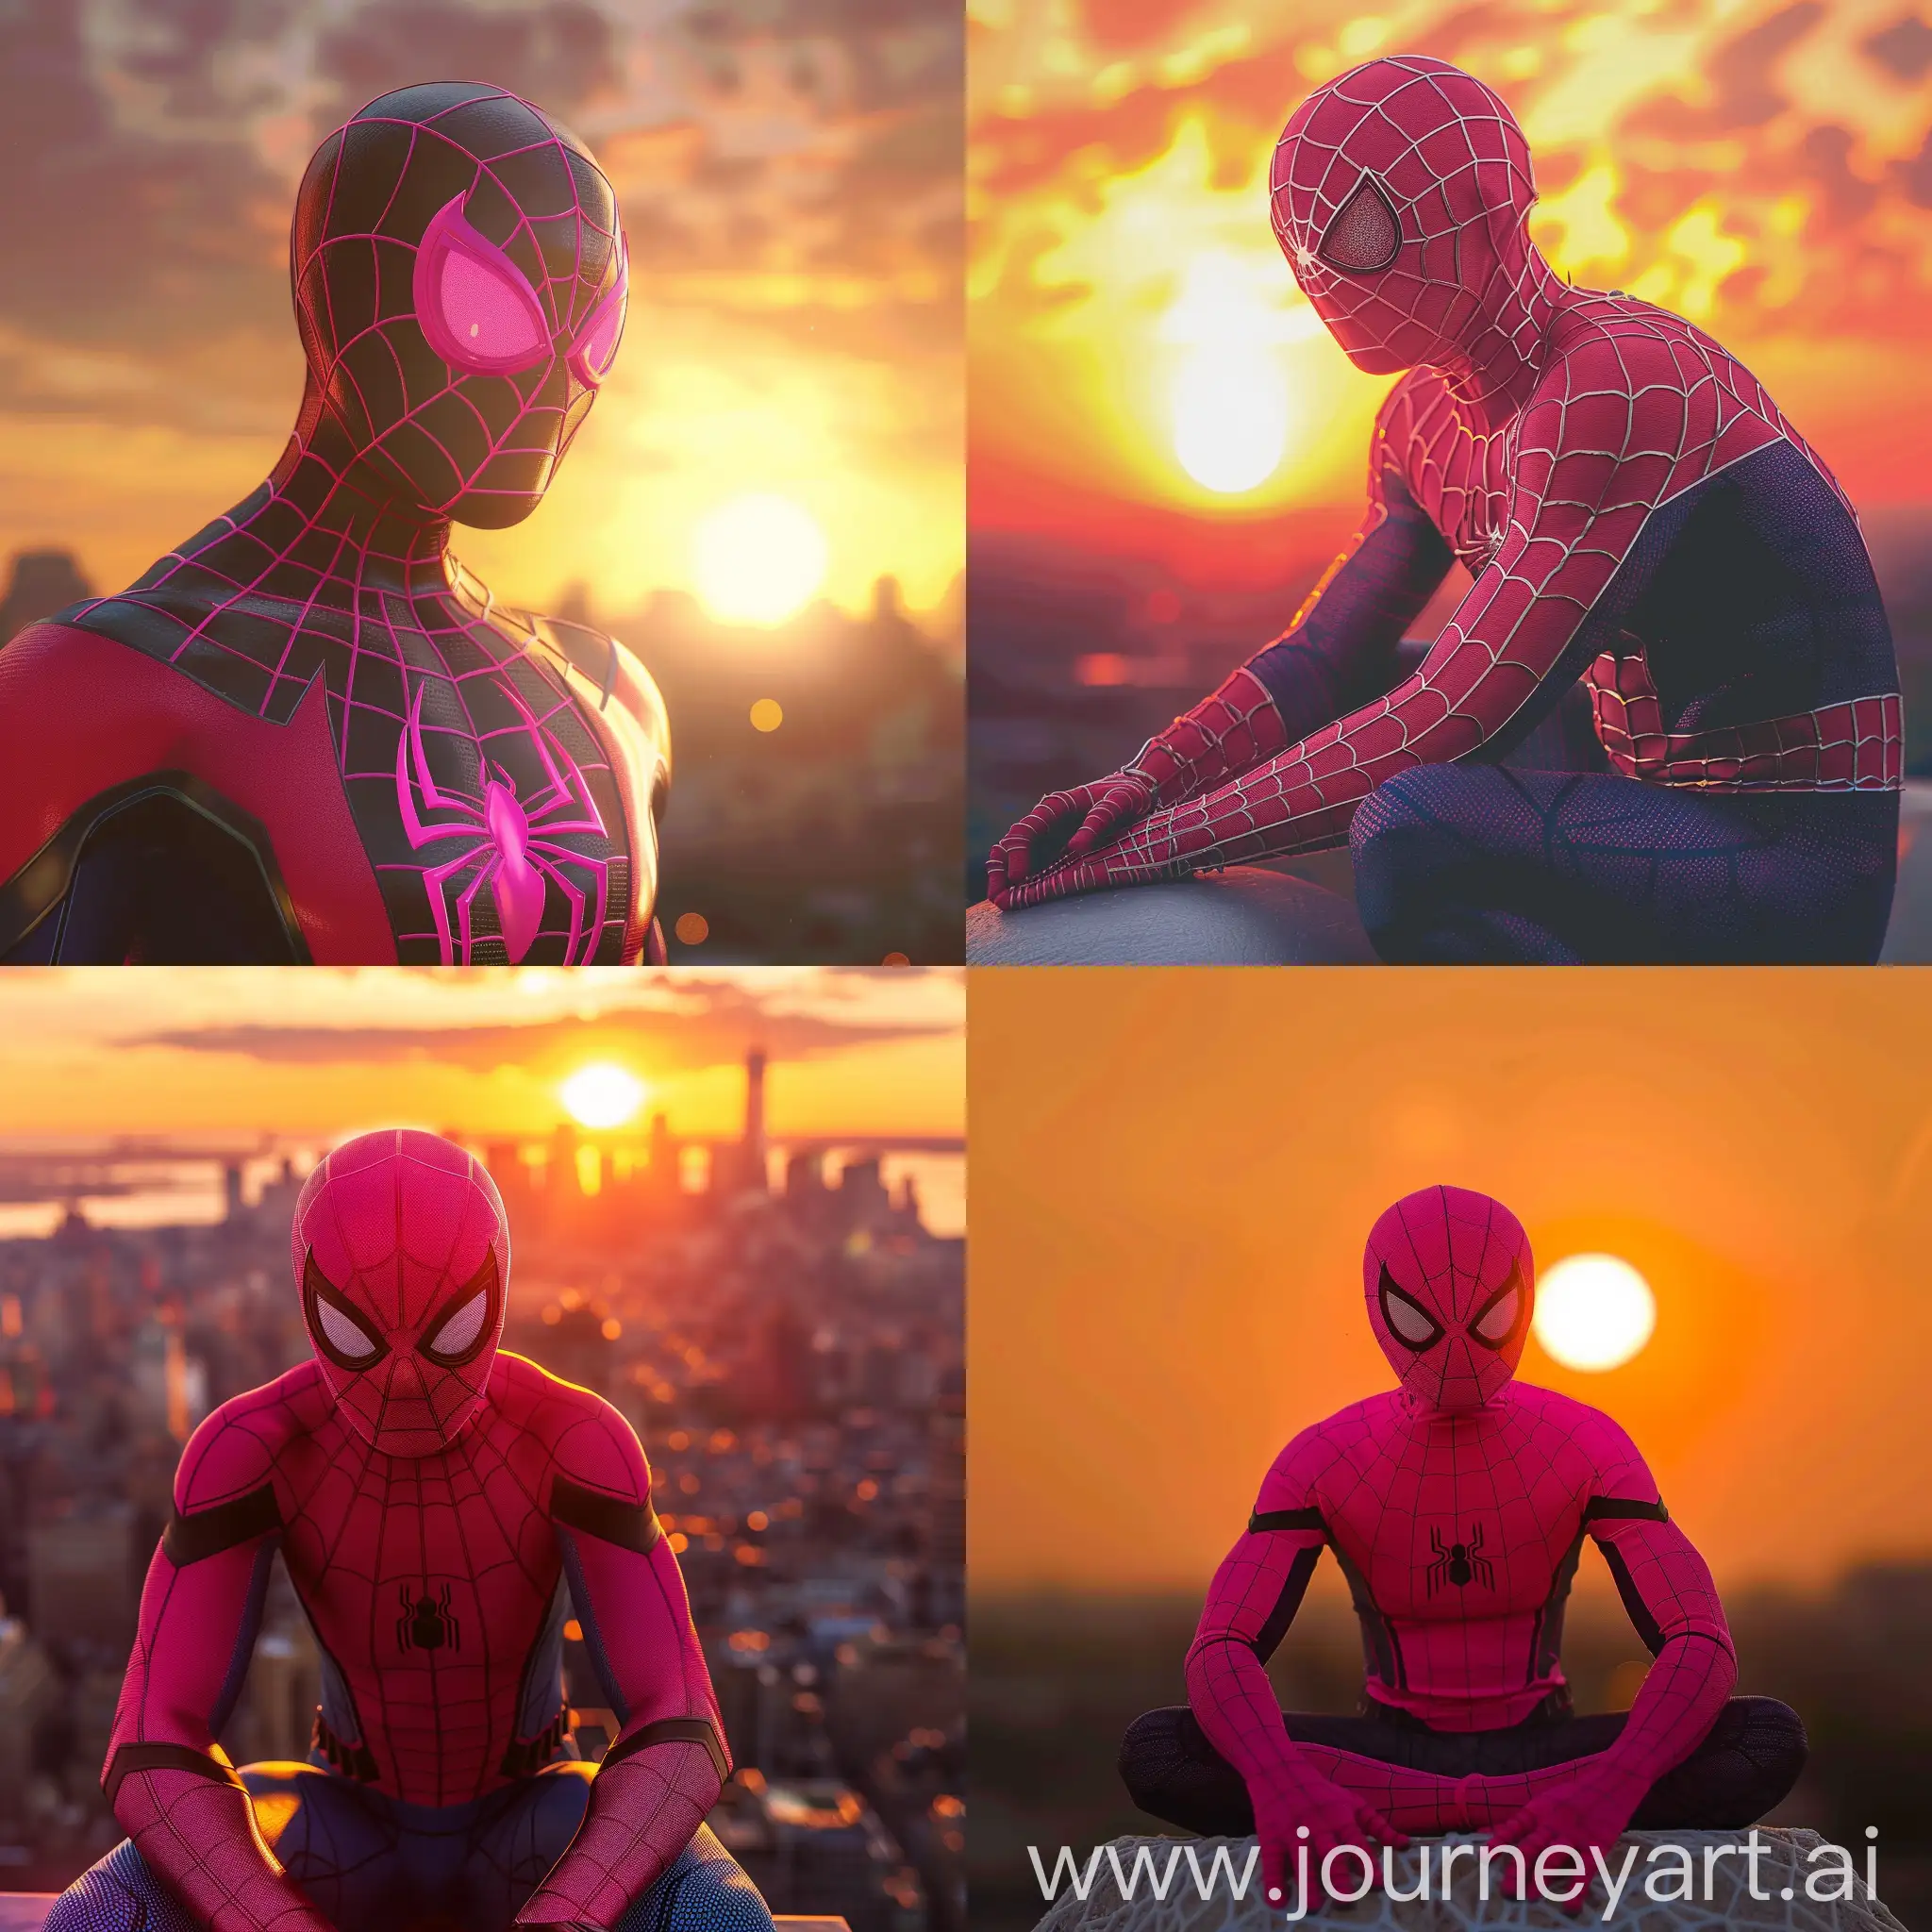 pink spiderman at the background sun set